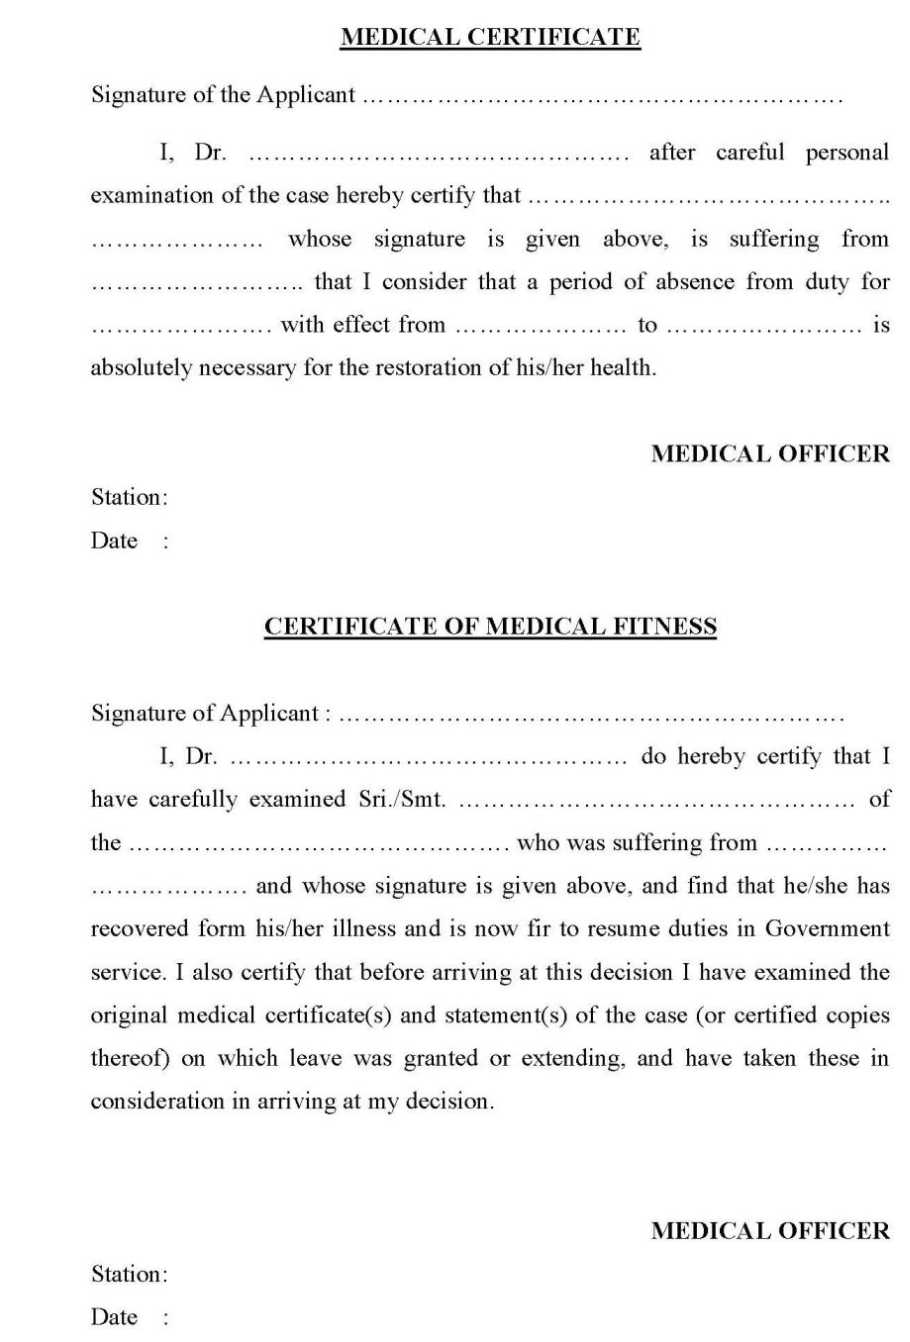 Medical form format to get medical certificate 2017 2018 StudyChaCha